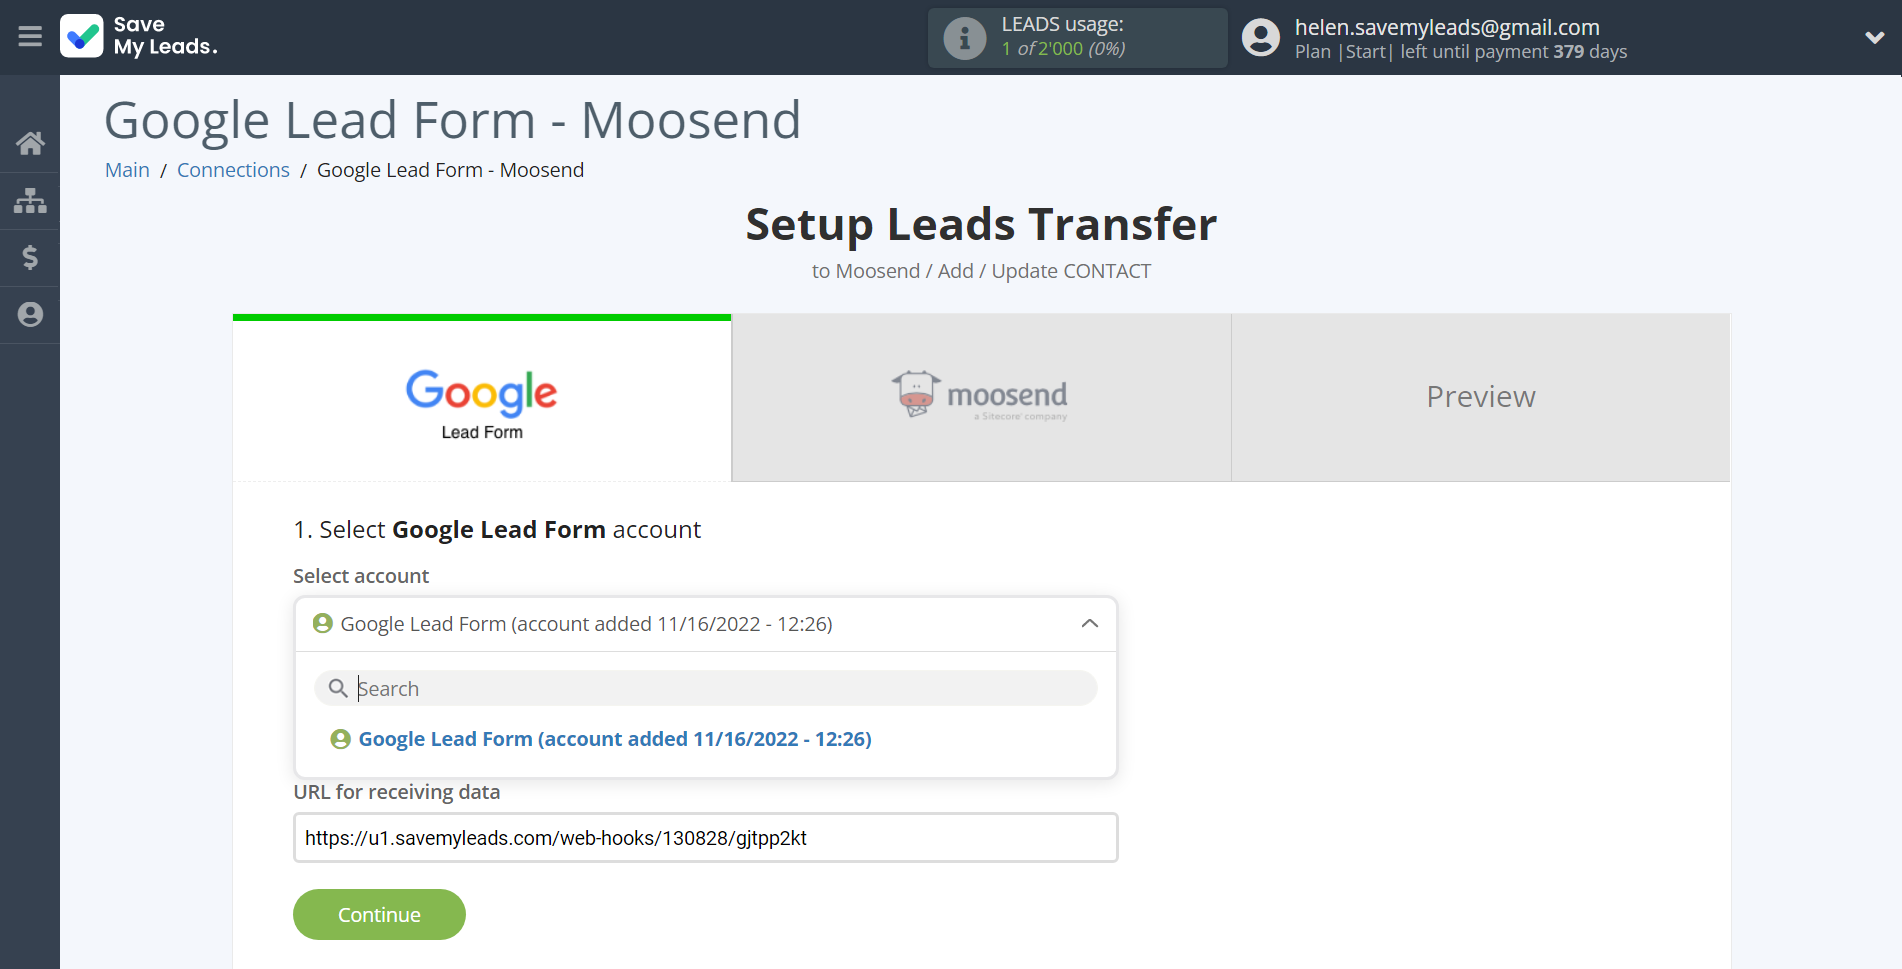 How to Connect Google Lead Form with Moosend | Data Source account selection